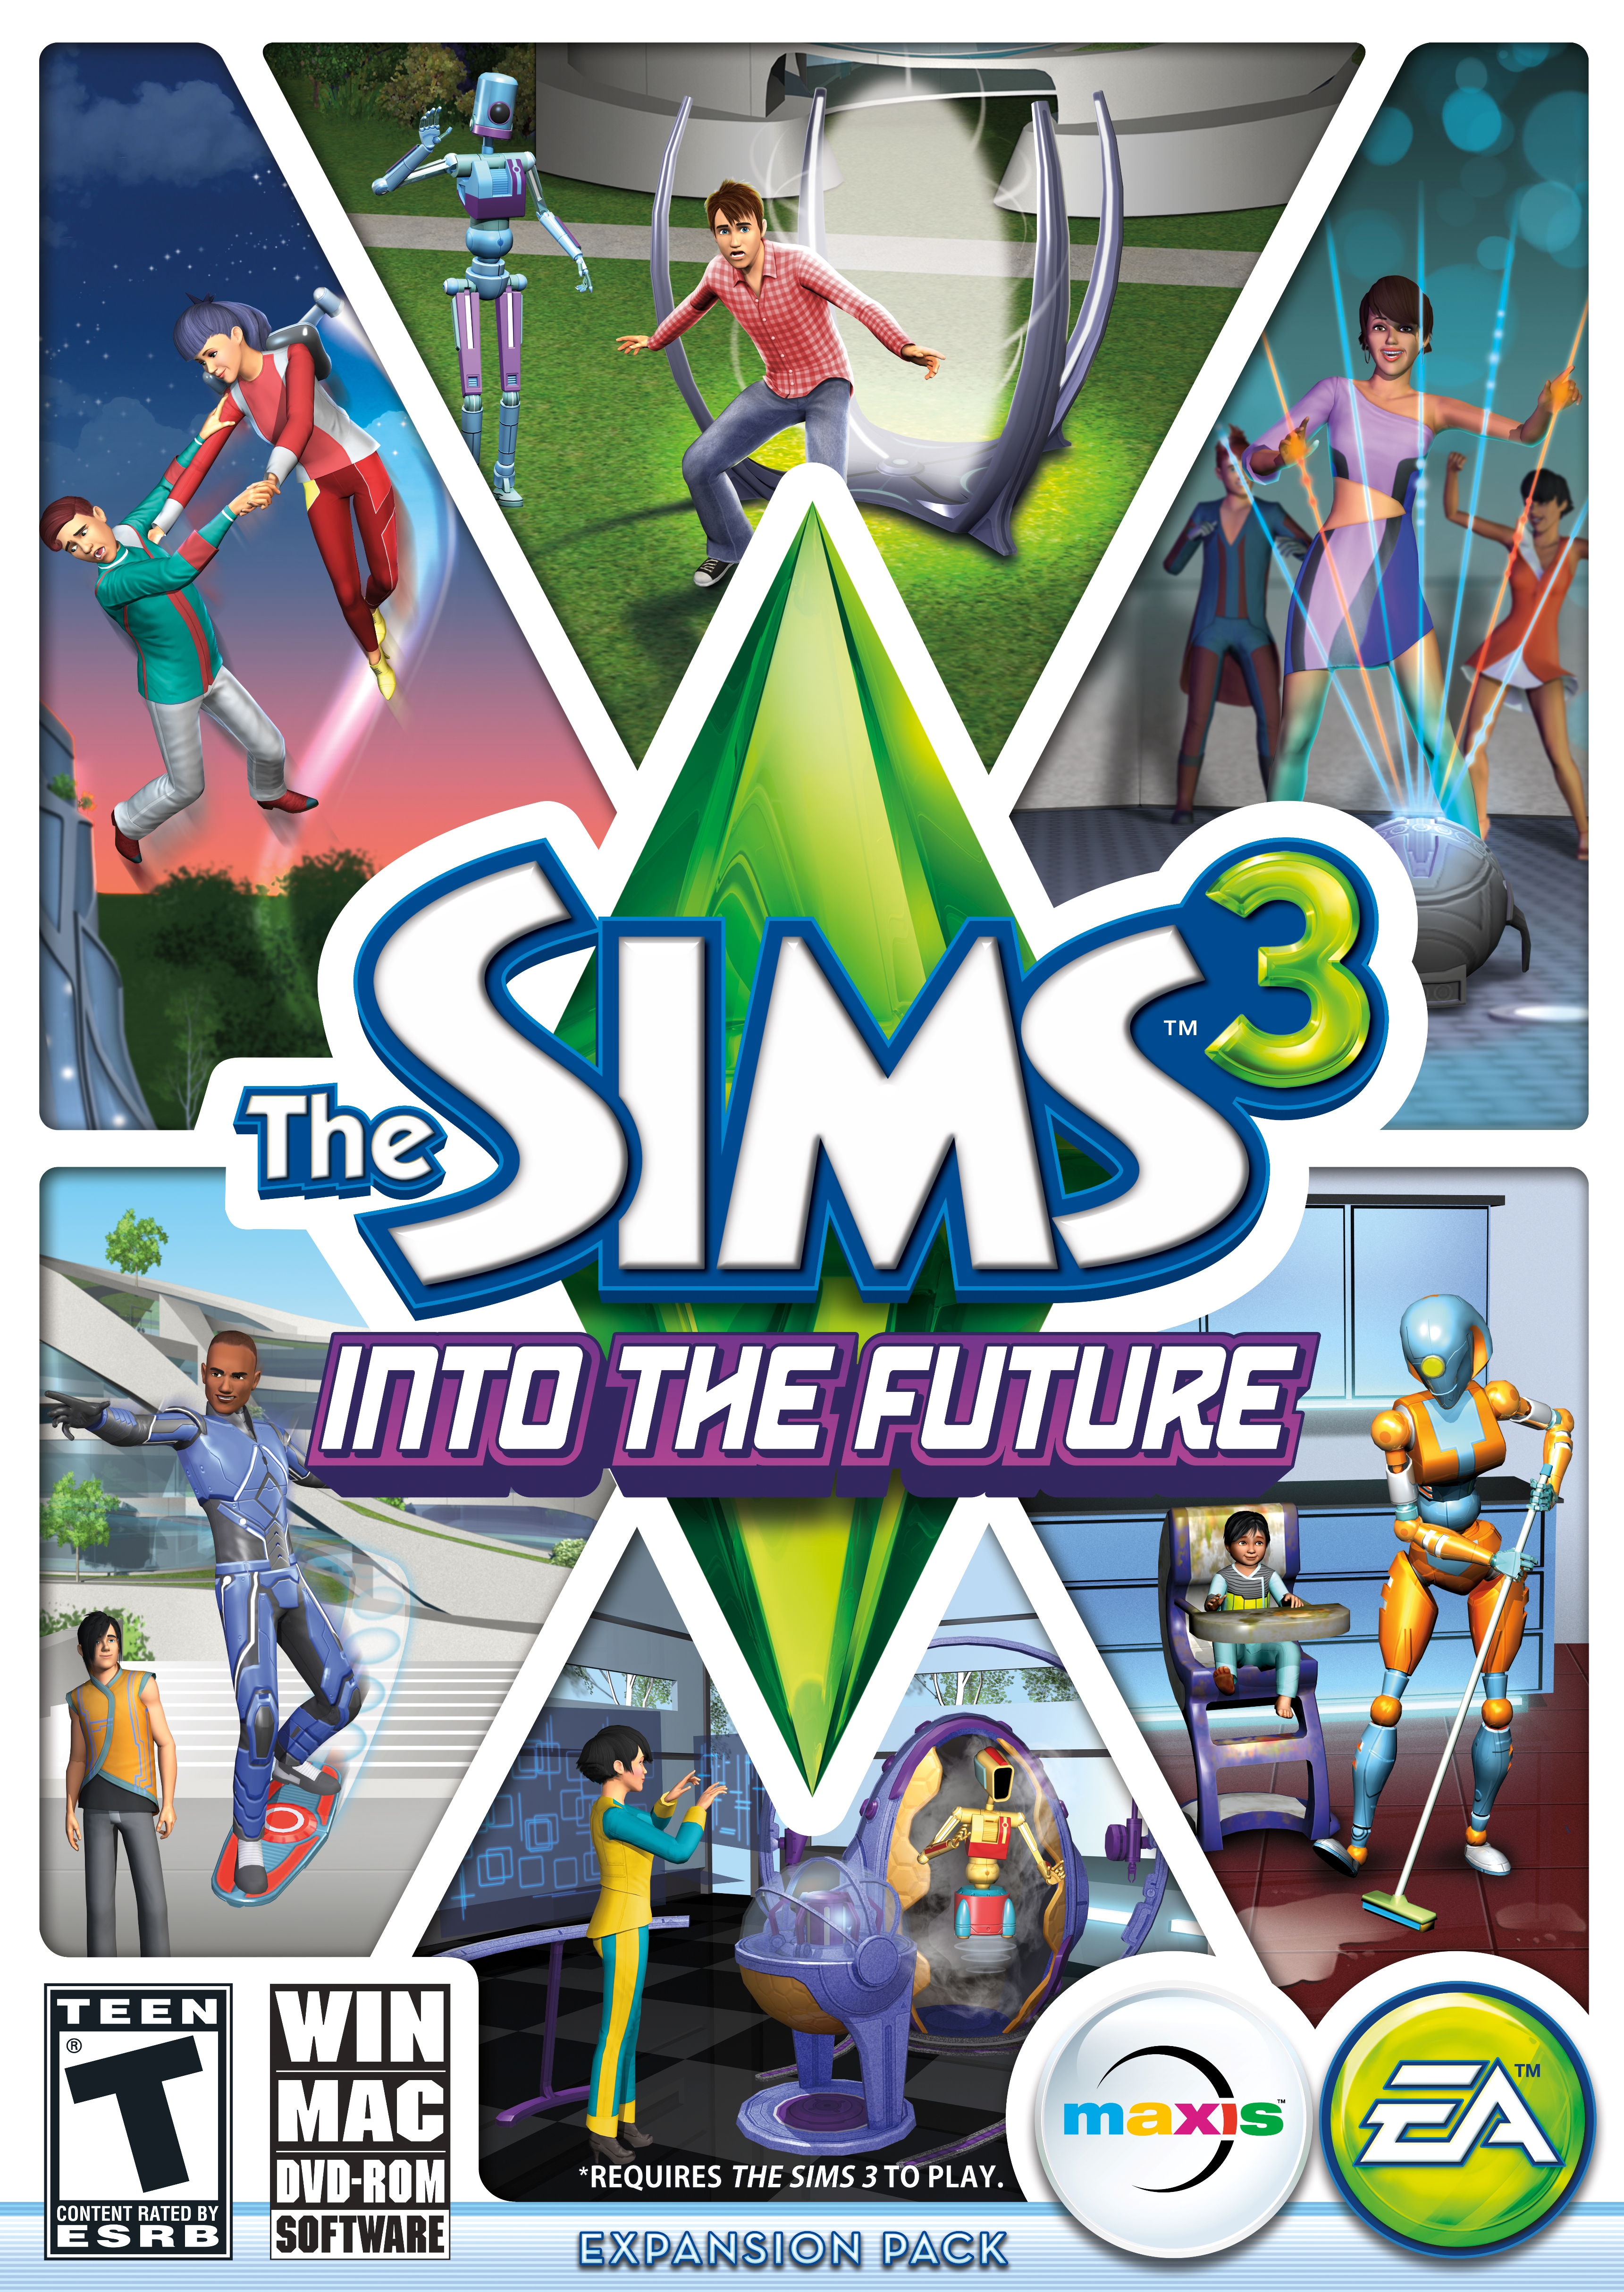 The_Sims_3_Into_The_Future_Cover.jpeg